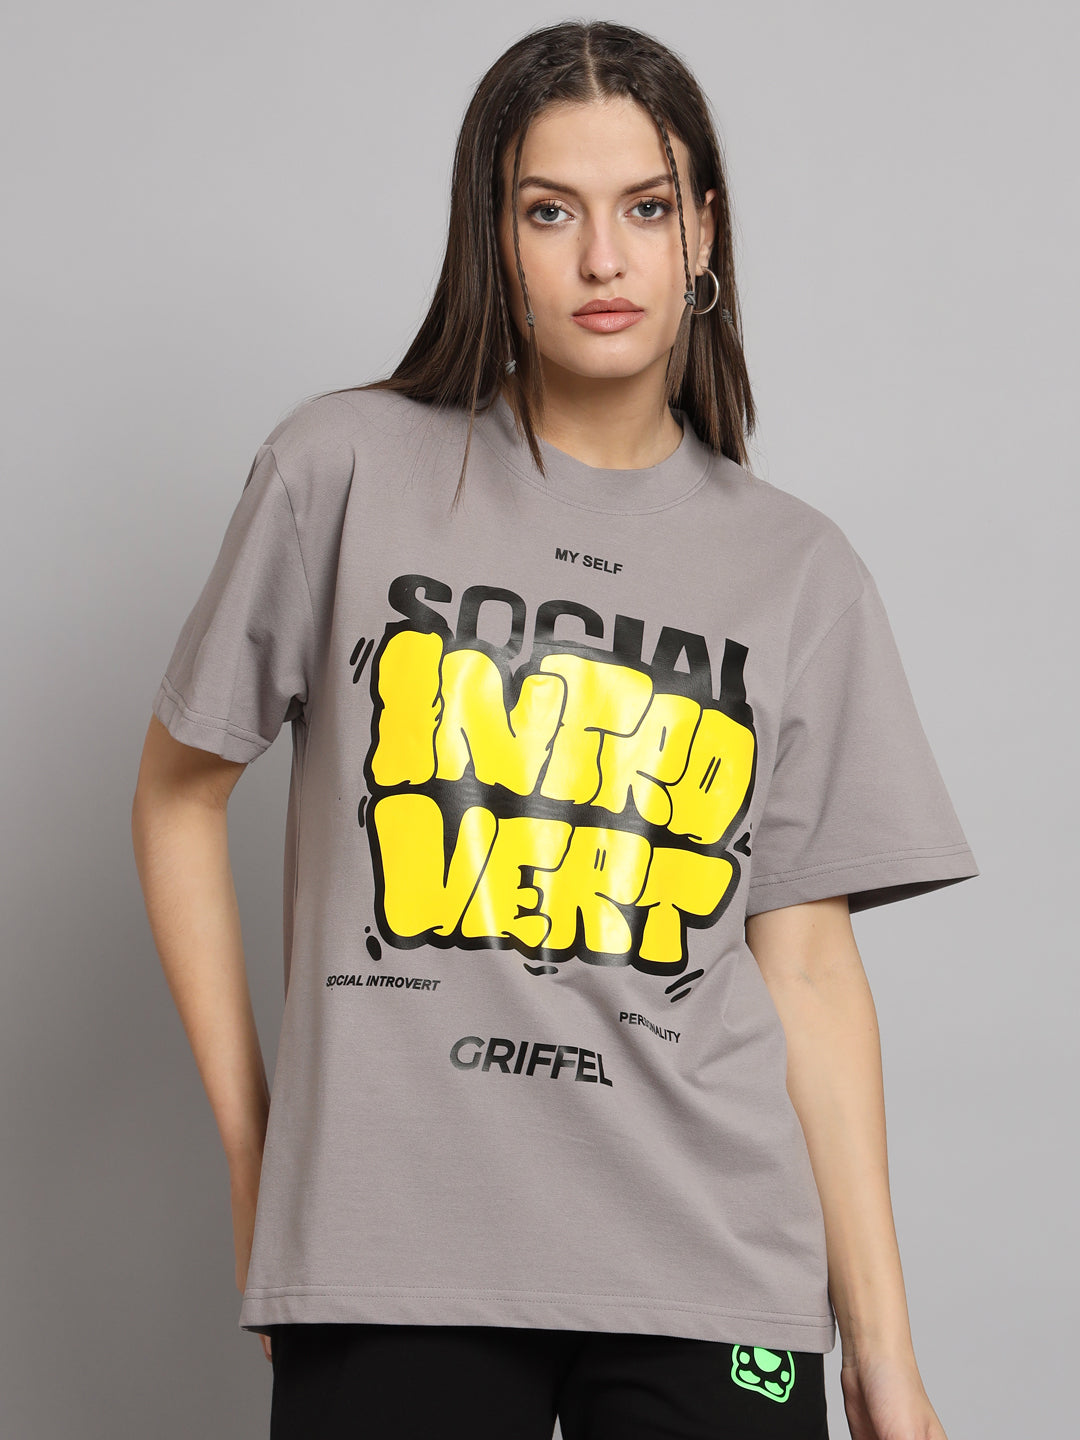 GRIFFEL Women SOCIAL INTROVERT Printed Loose fit Steel Grey T-shirt - griffel